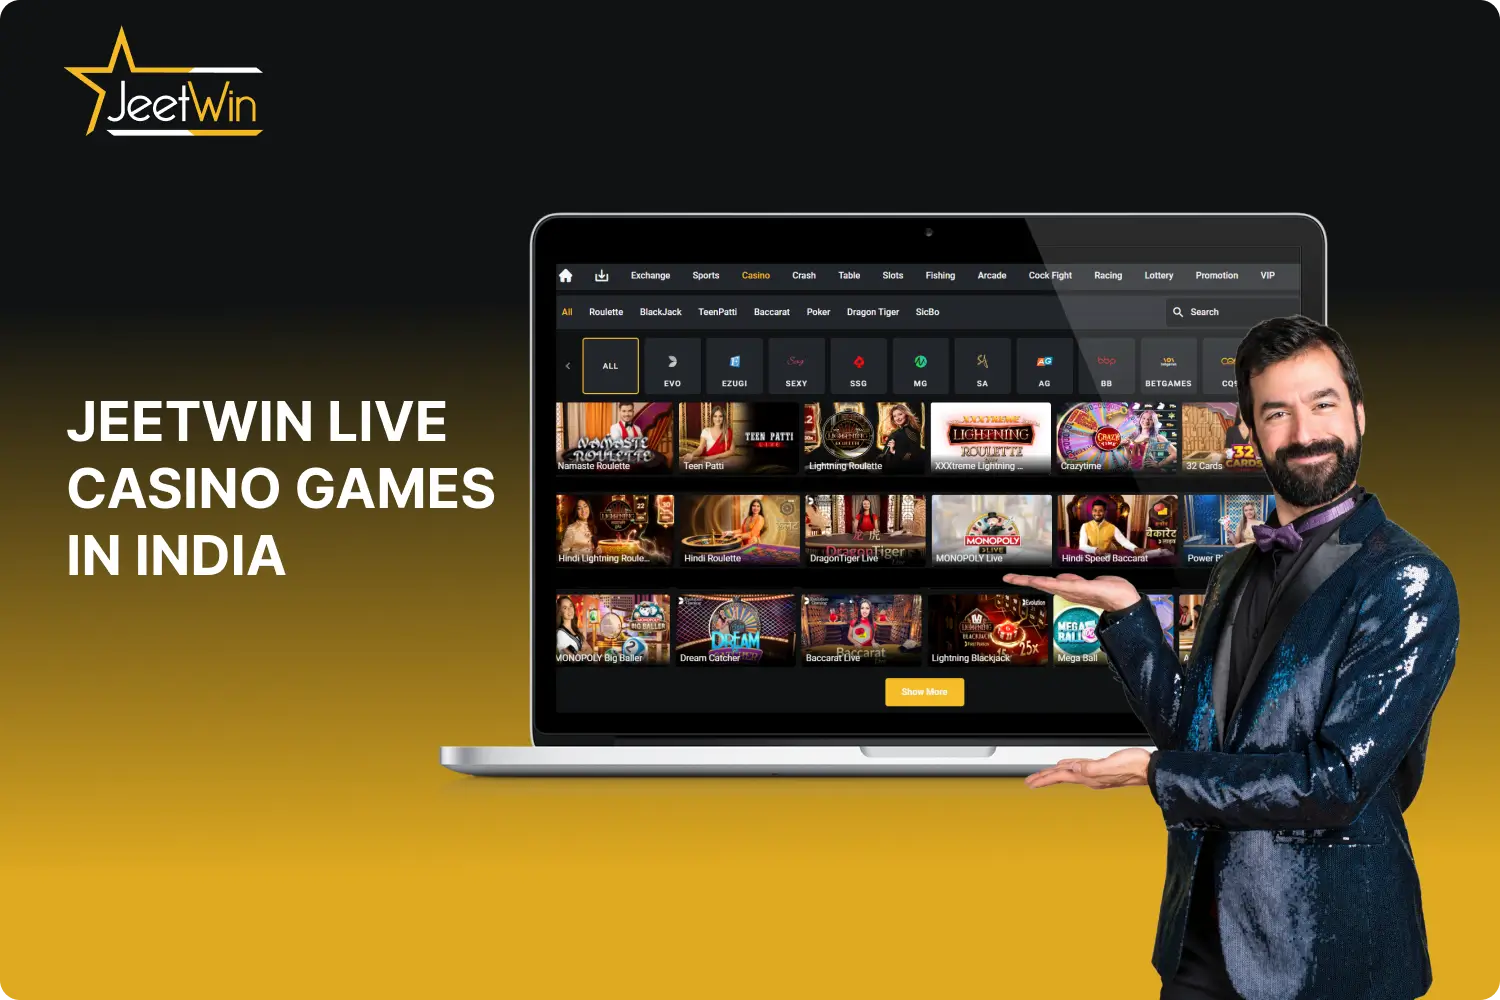 Jeetwin Casino has above 100 live dealer games for players in India